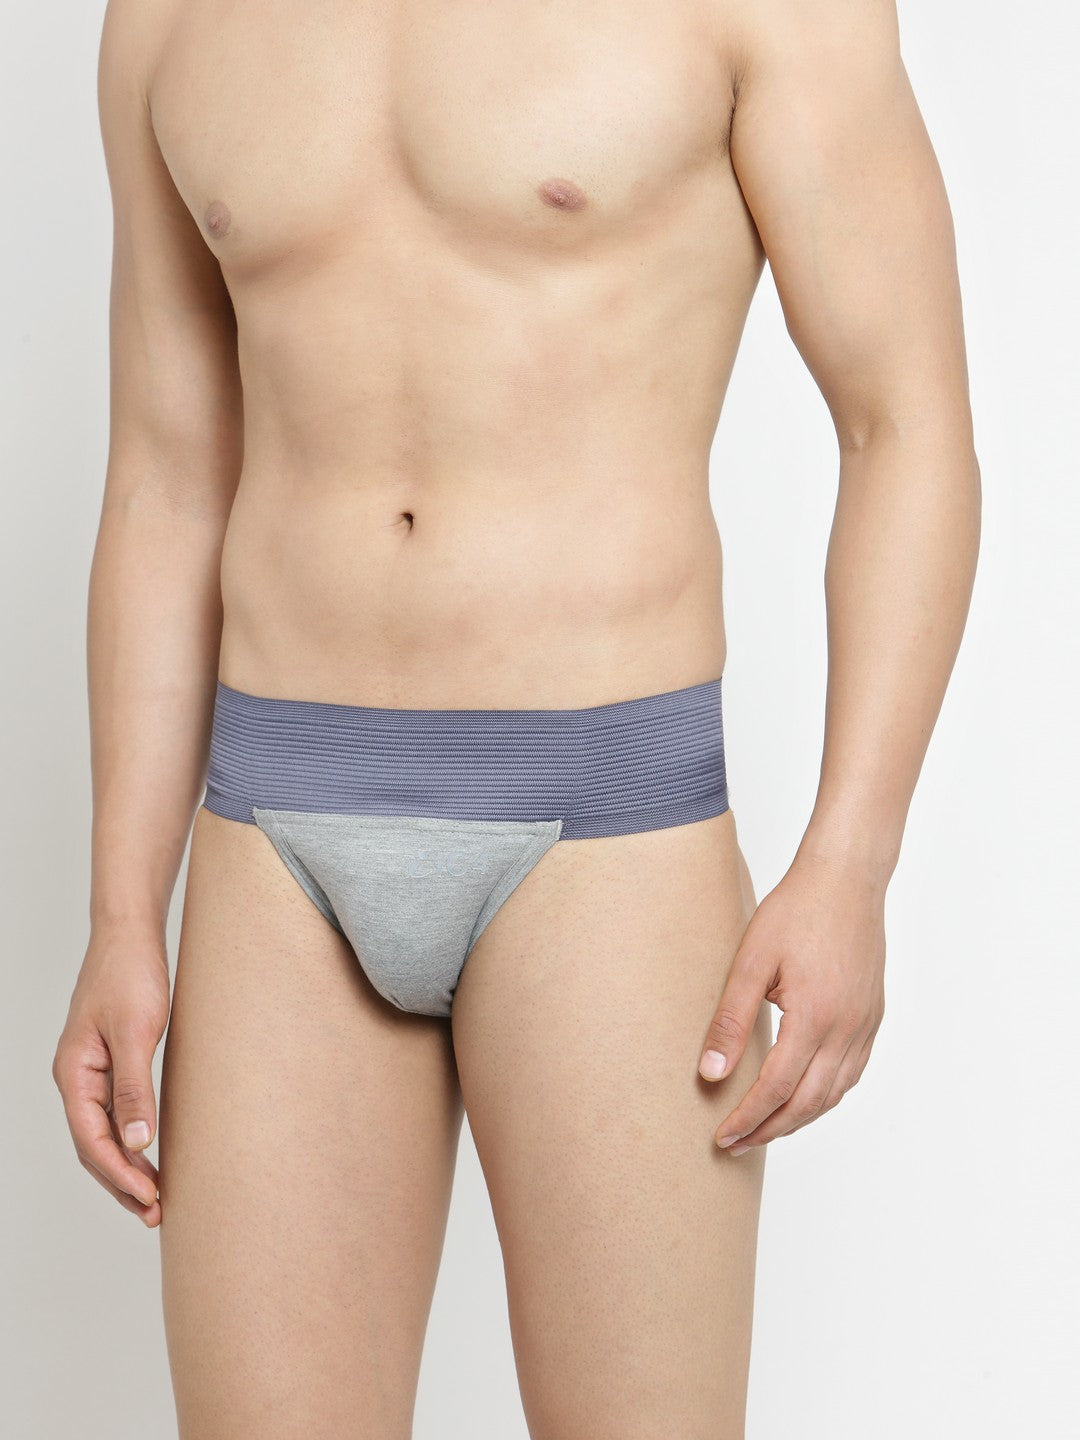 IC4 Men's Gym Supporter - Grey